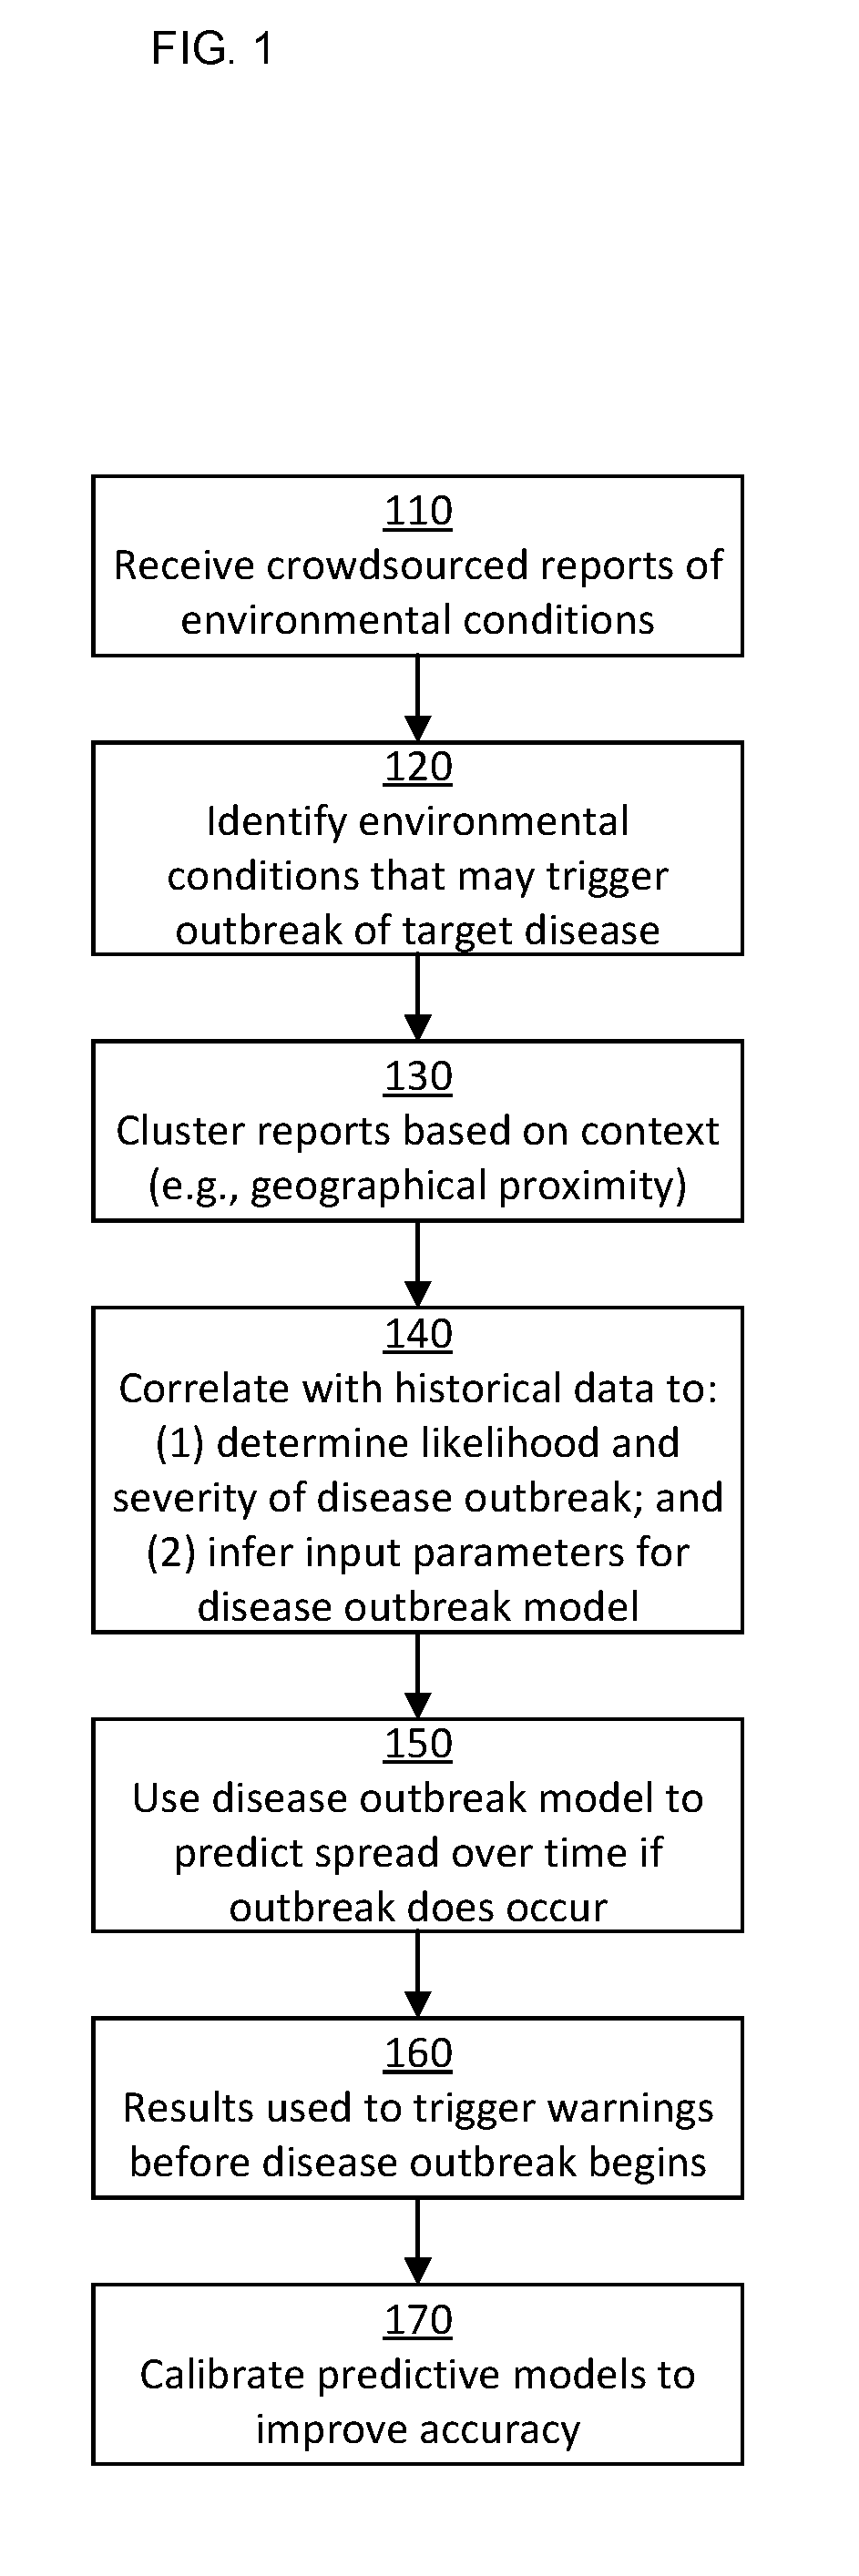 Disease prediction and prevention using crowdsourced reports of environmental conditions